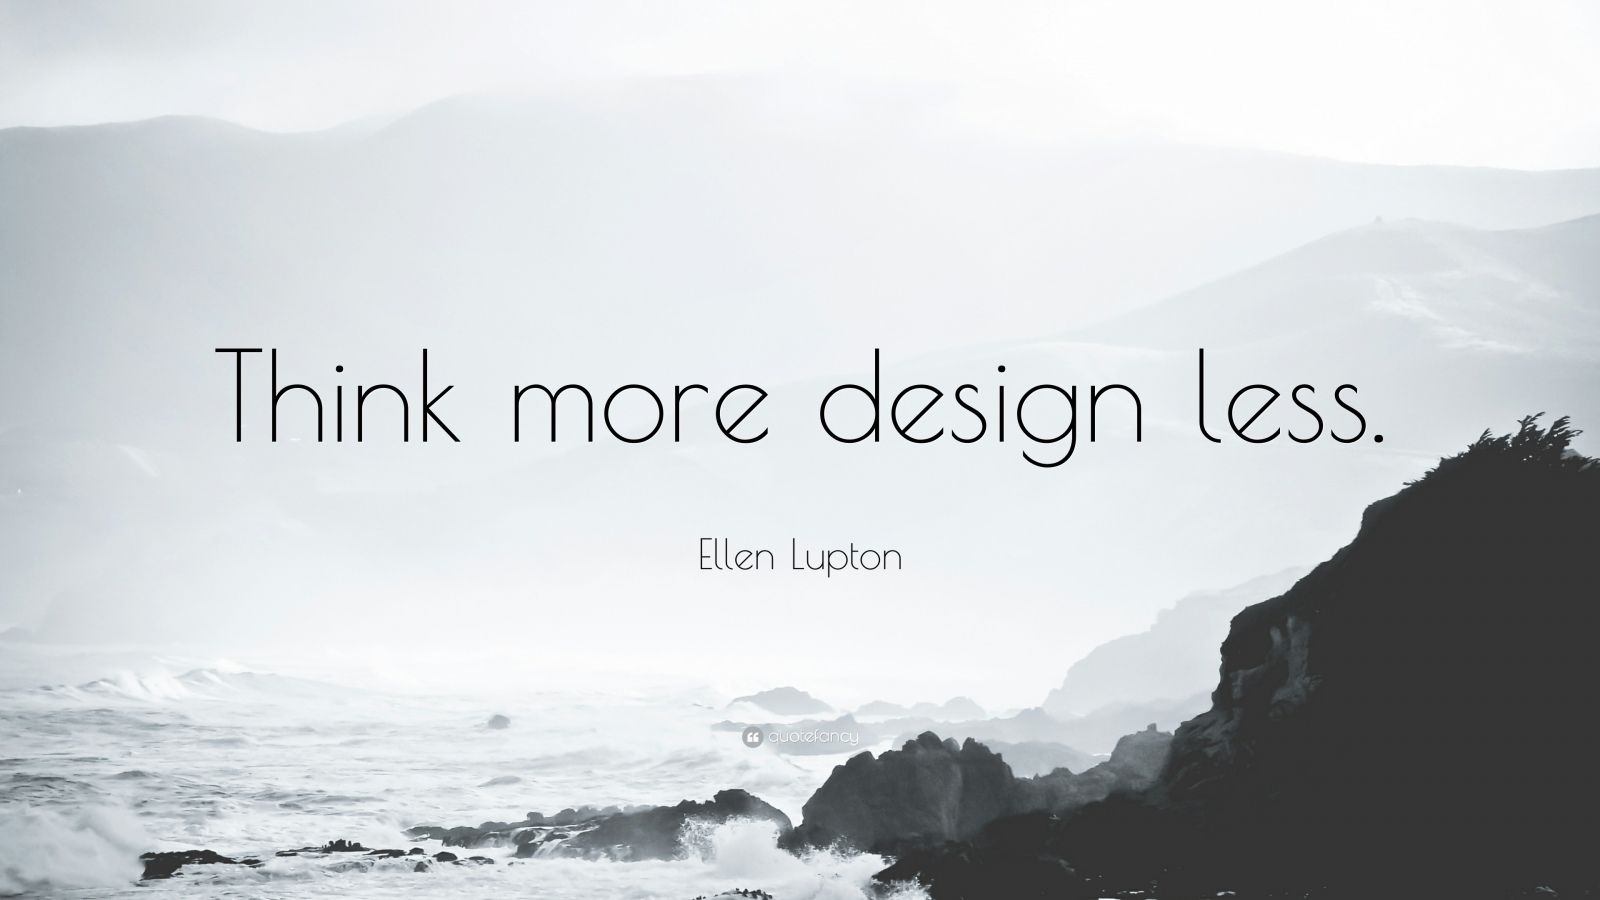 Inspirational Quotes from Famous Designers - Ellen Lupton - Think